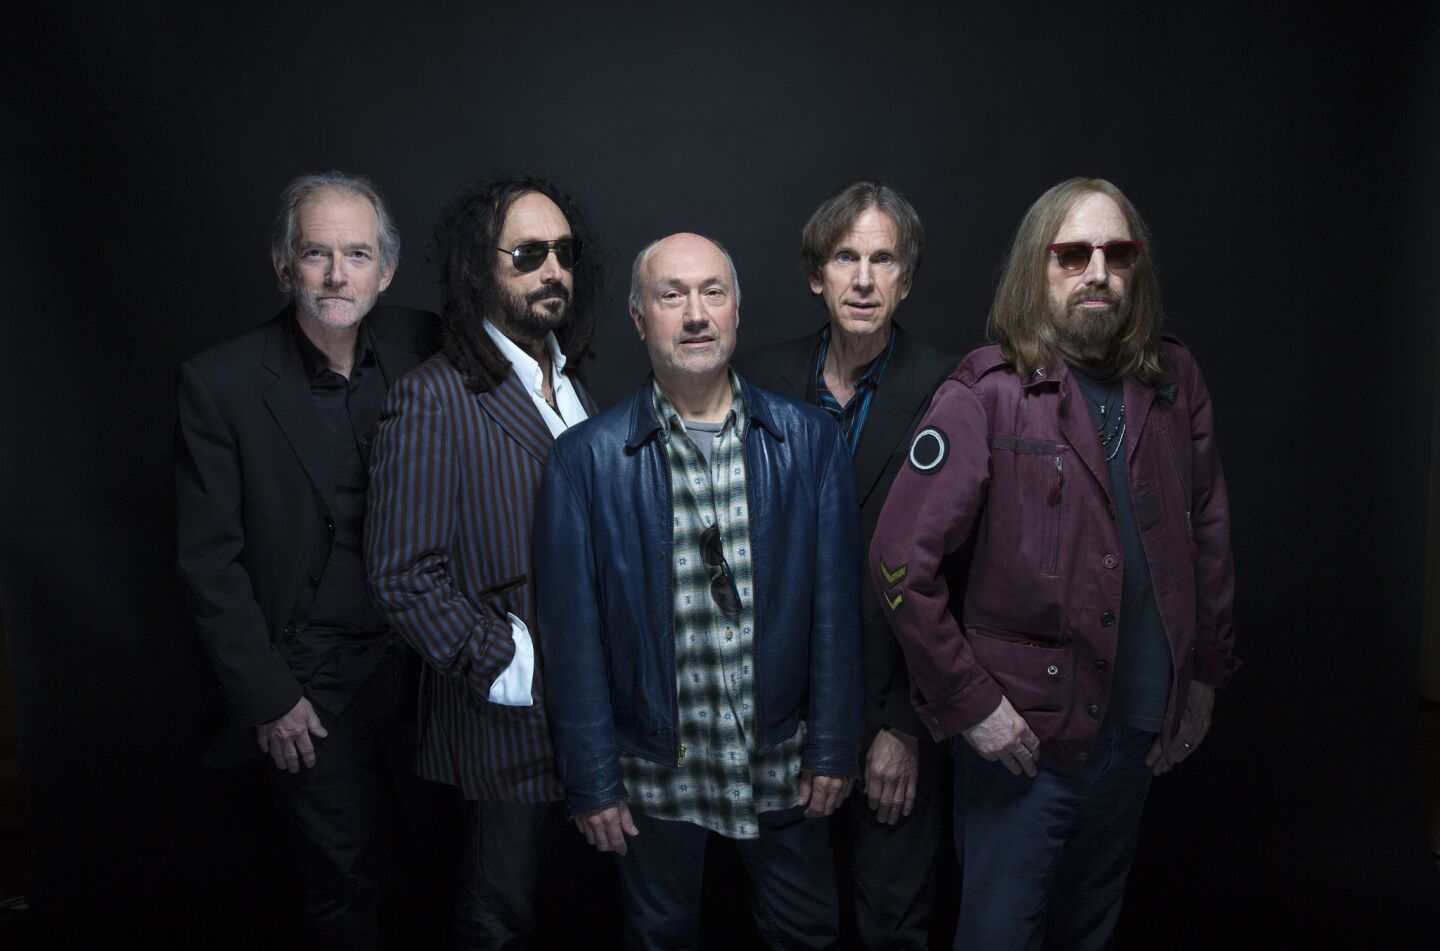 Members of Mudcrutch, from left, Benmont Tench, Mike Campbell, Randall Marsh, Tom Leadon and Tom Petty at Warner Bros. Records in Burbank on April 7, 2016.